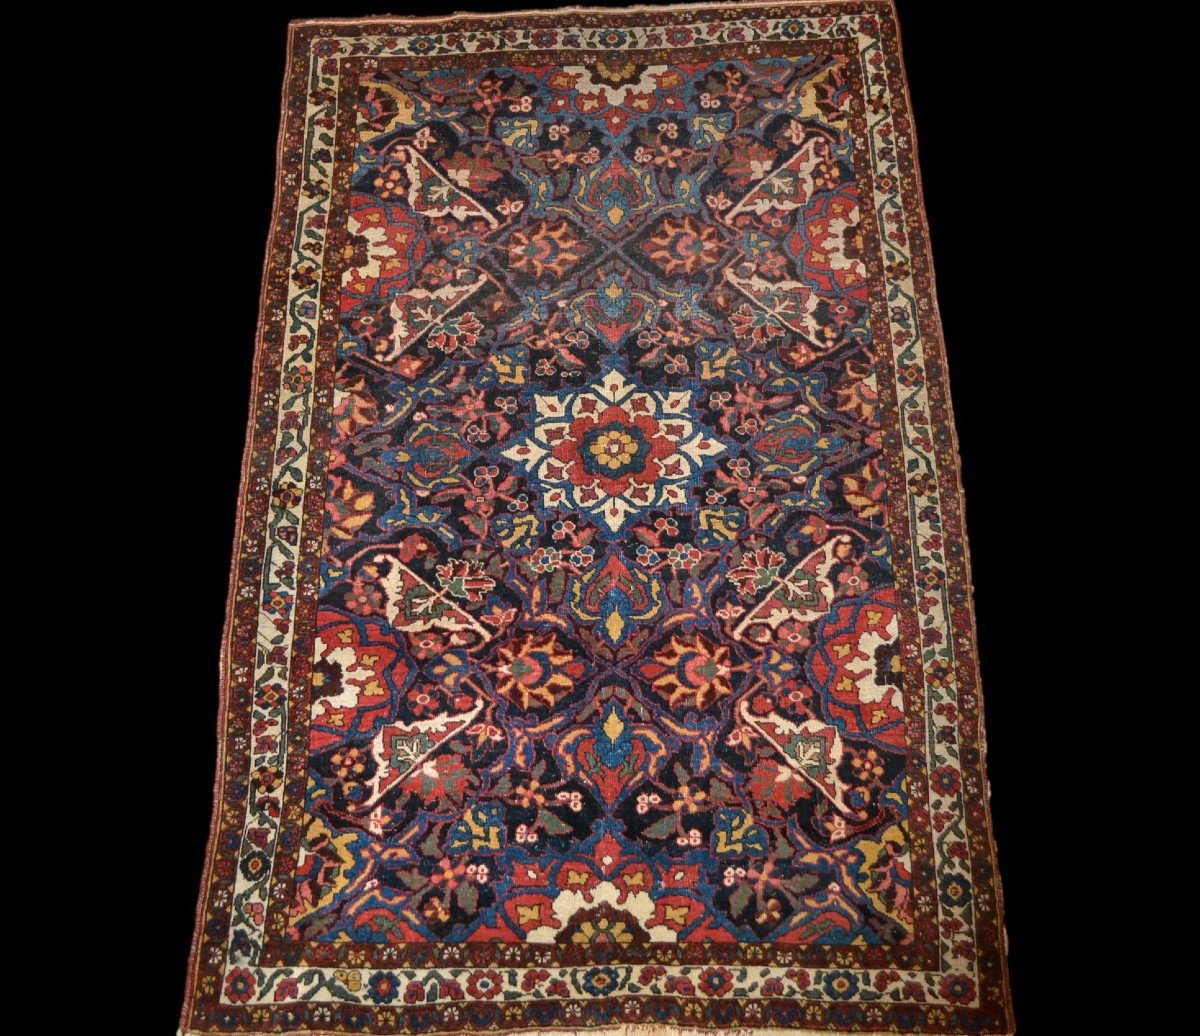 Old Persian Bakthiar Rug, 138 Cm X 213 Cm, Iran, Hand Knotted Around 1950, In Good Condition